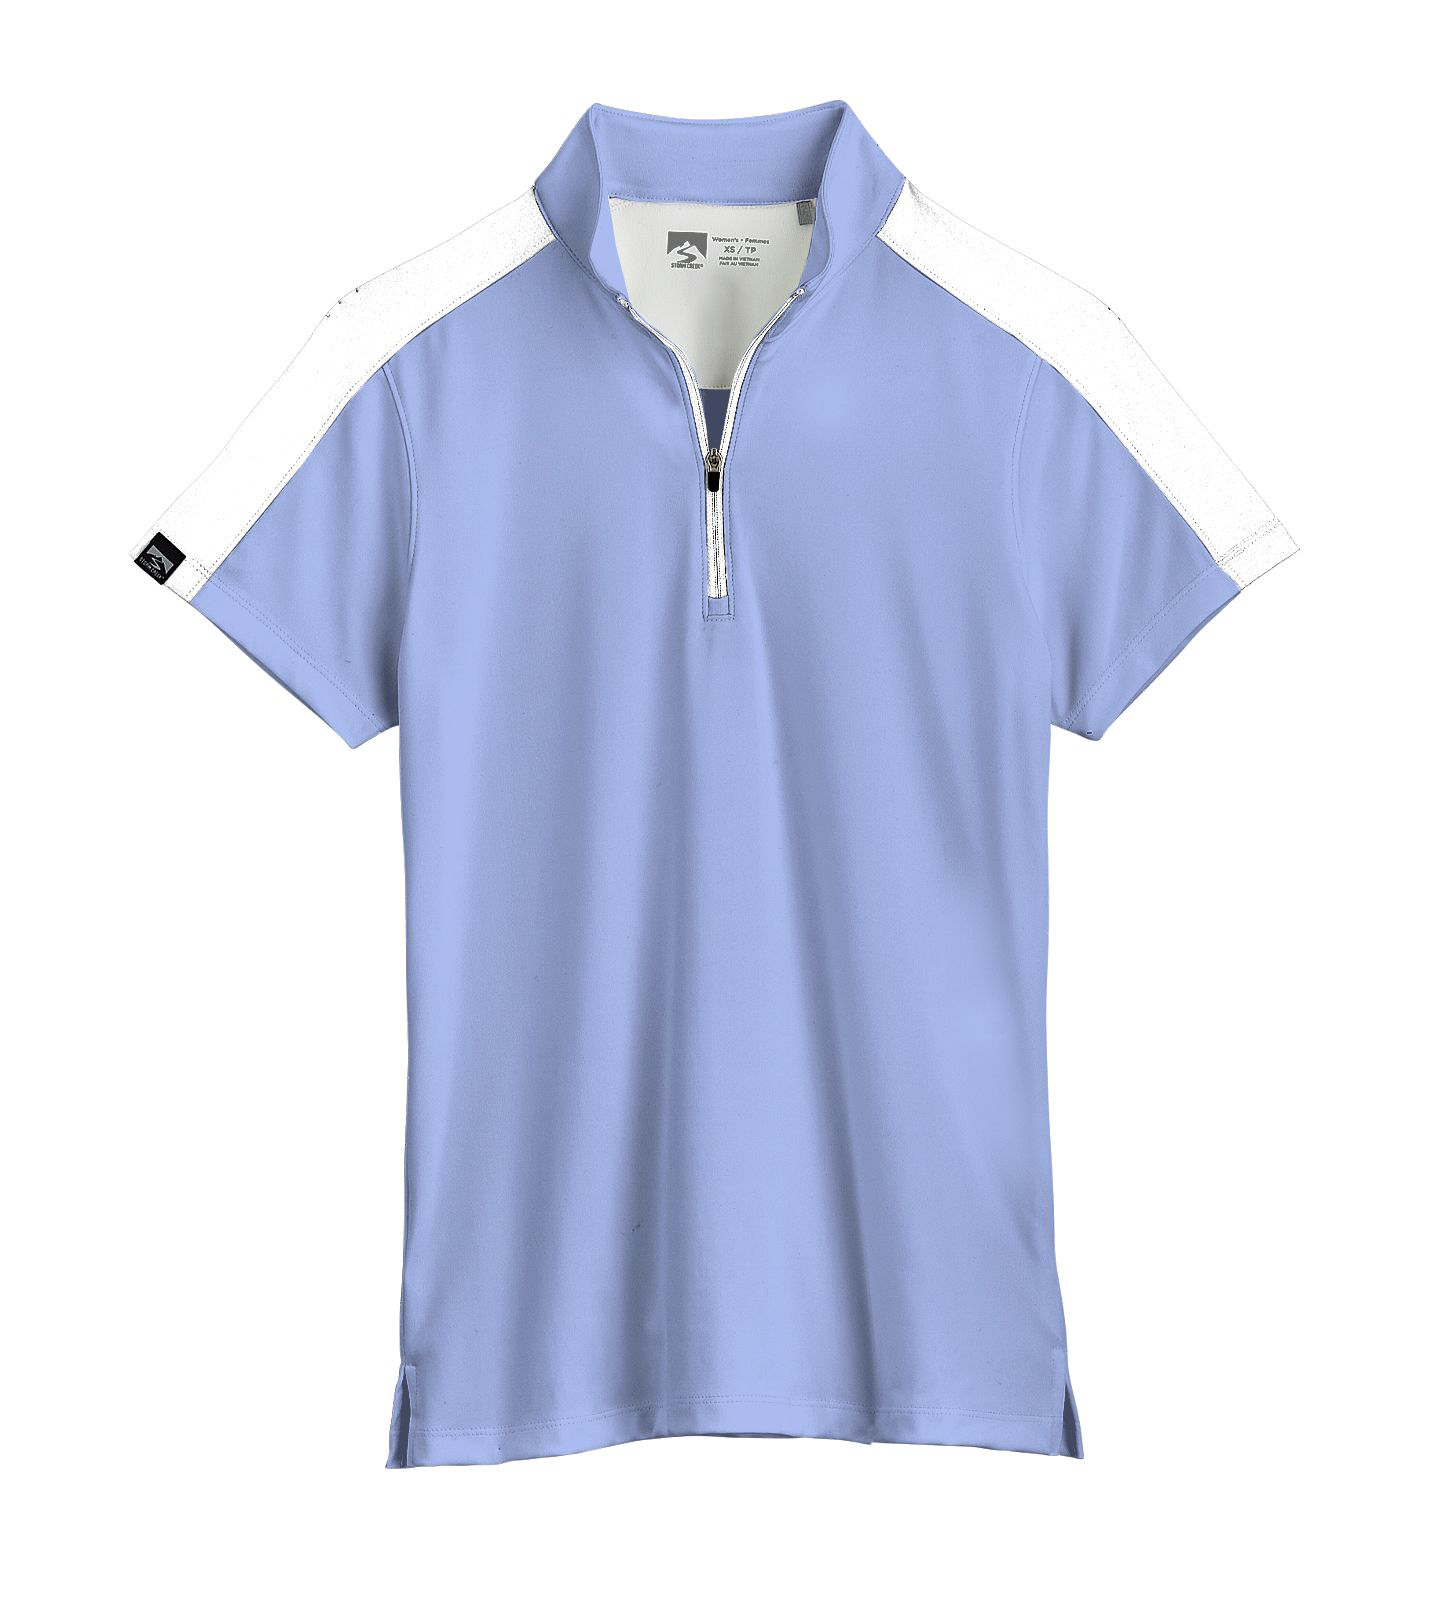 Storm Creek Activator Short-Sleeve Polo Shirt for Ladies - Peri Blue/White - L